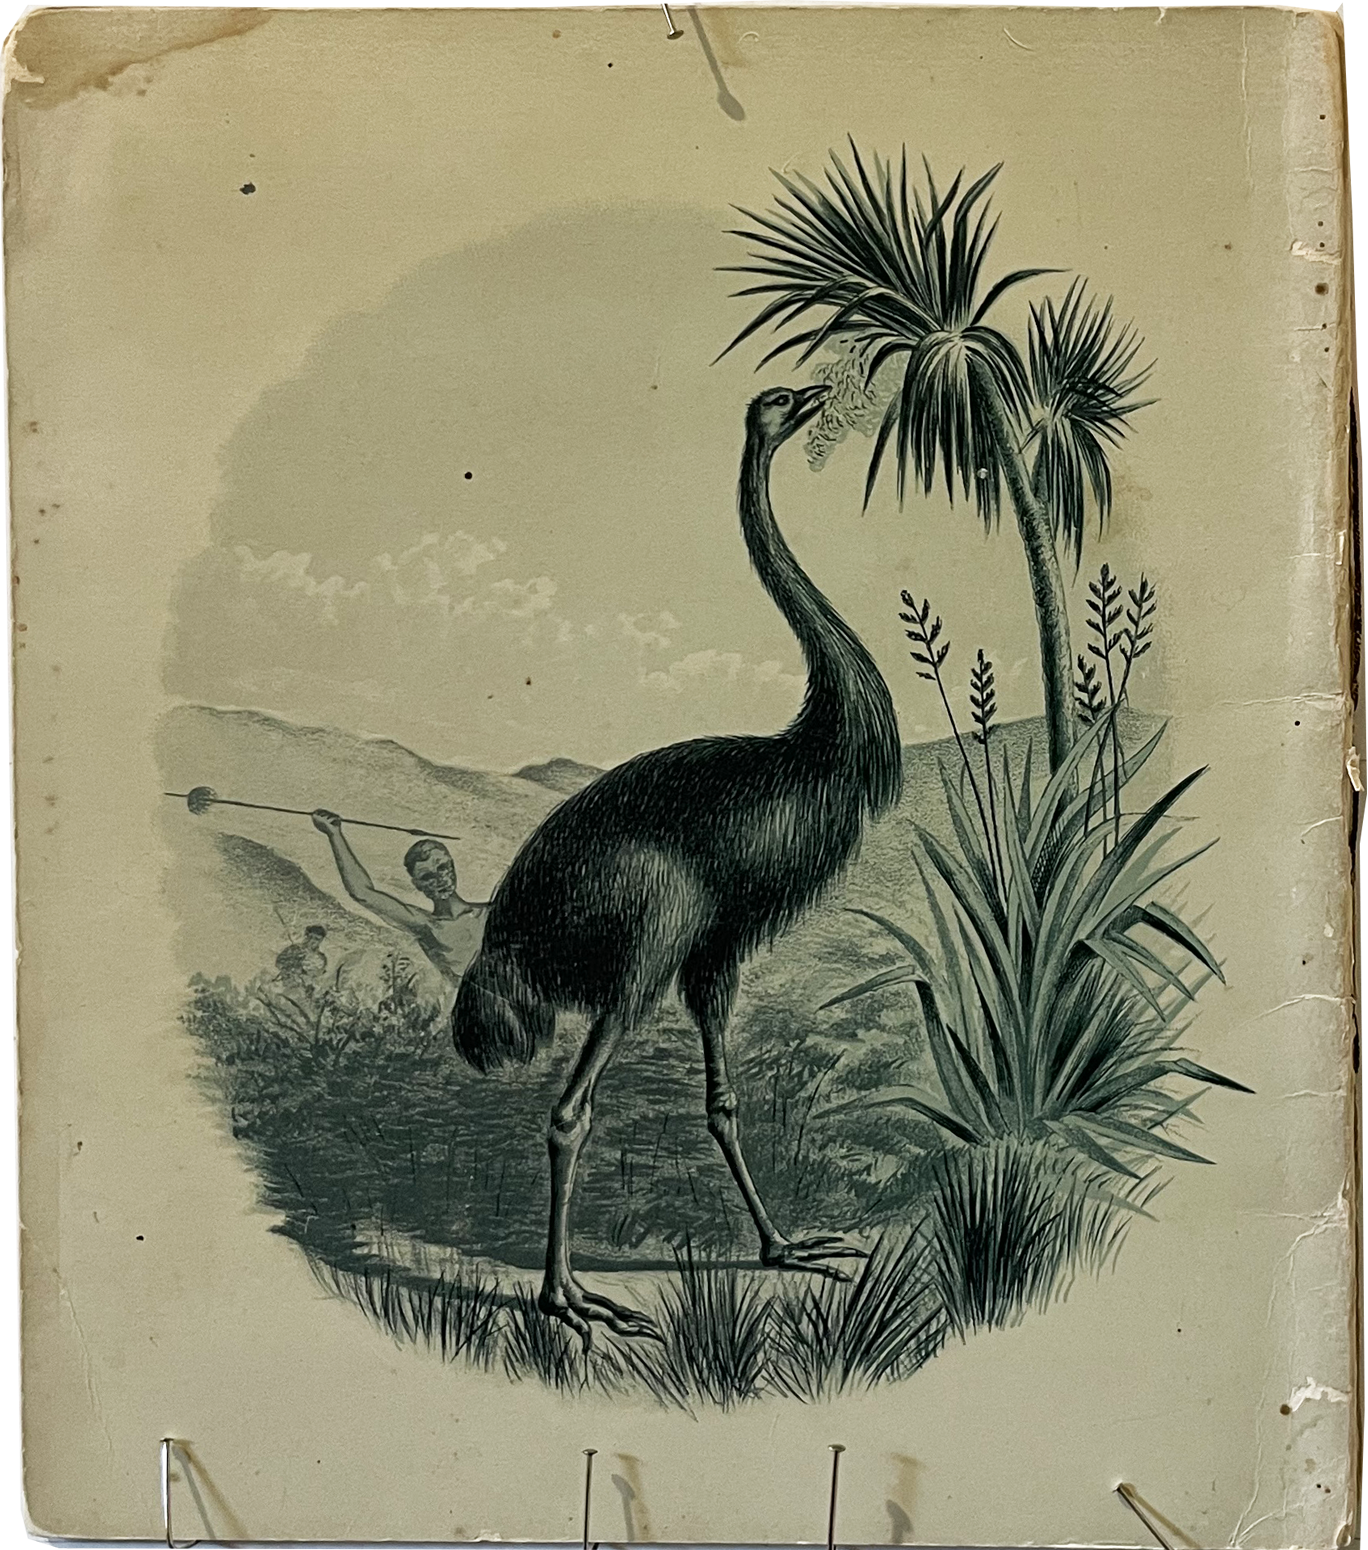 The Land of the Moa(back cover) A D Willis, New Zealand Sepia Lithograph booklet